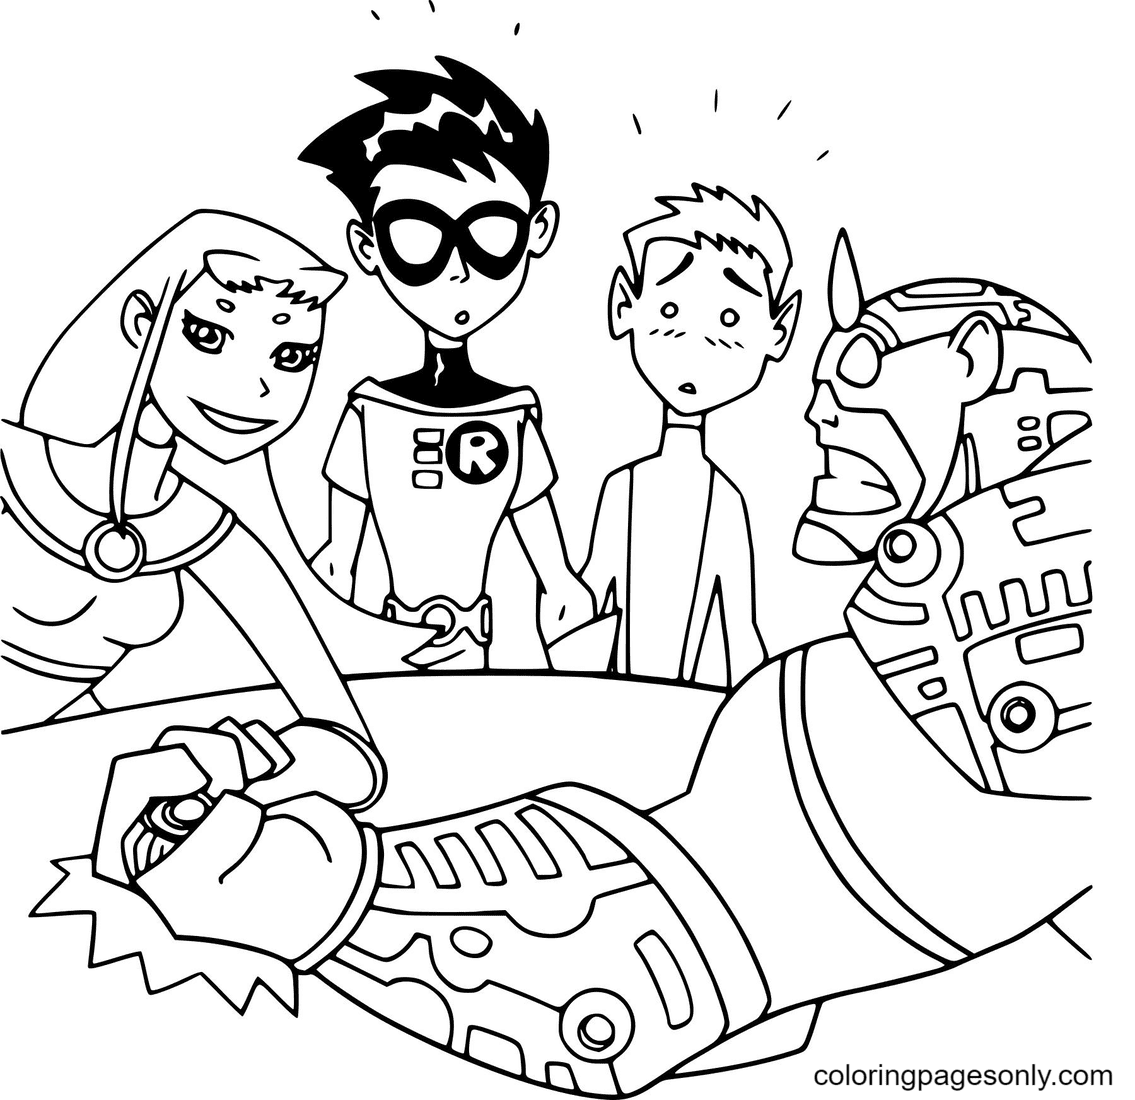 Challenge Teen Titans Go Coloring Page